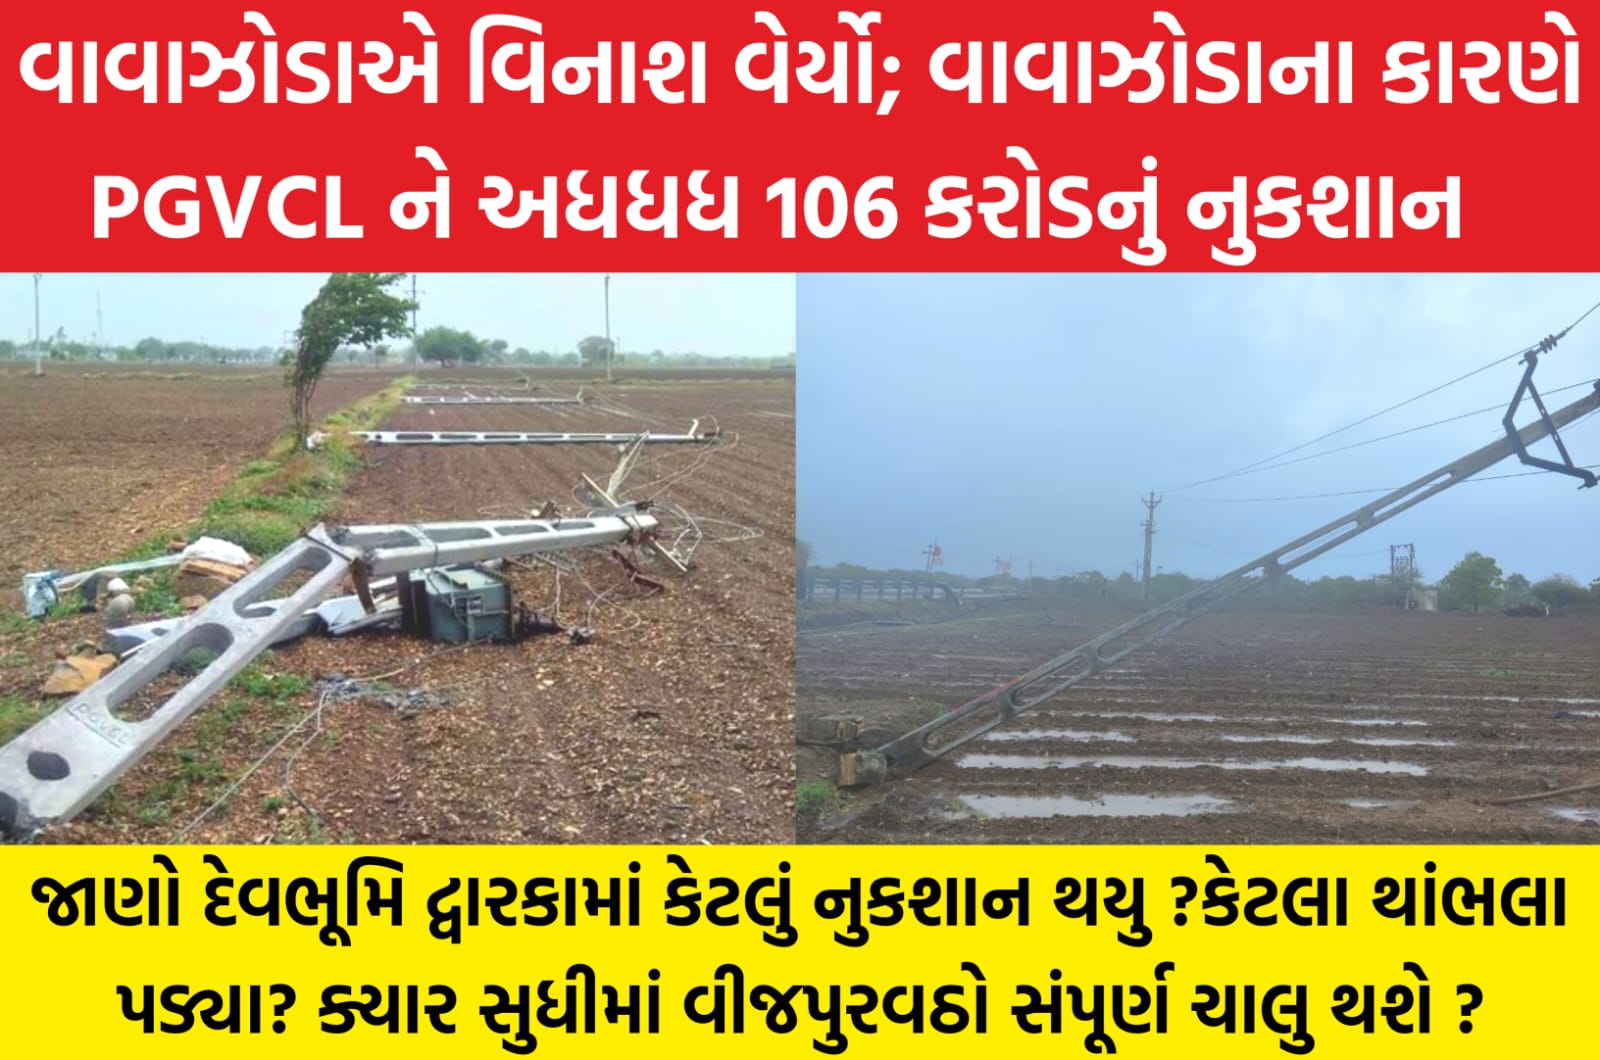 106 crore loss to PGVCL due to cyclone